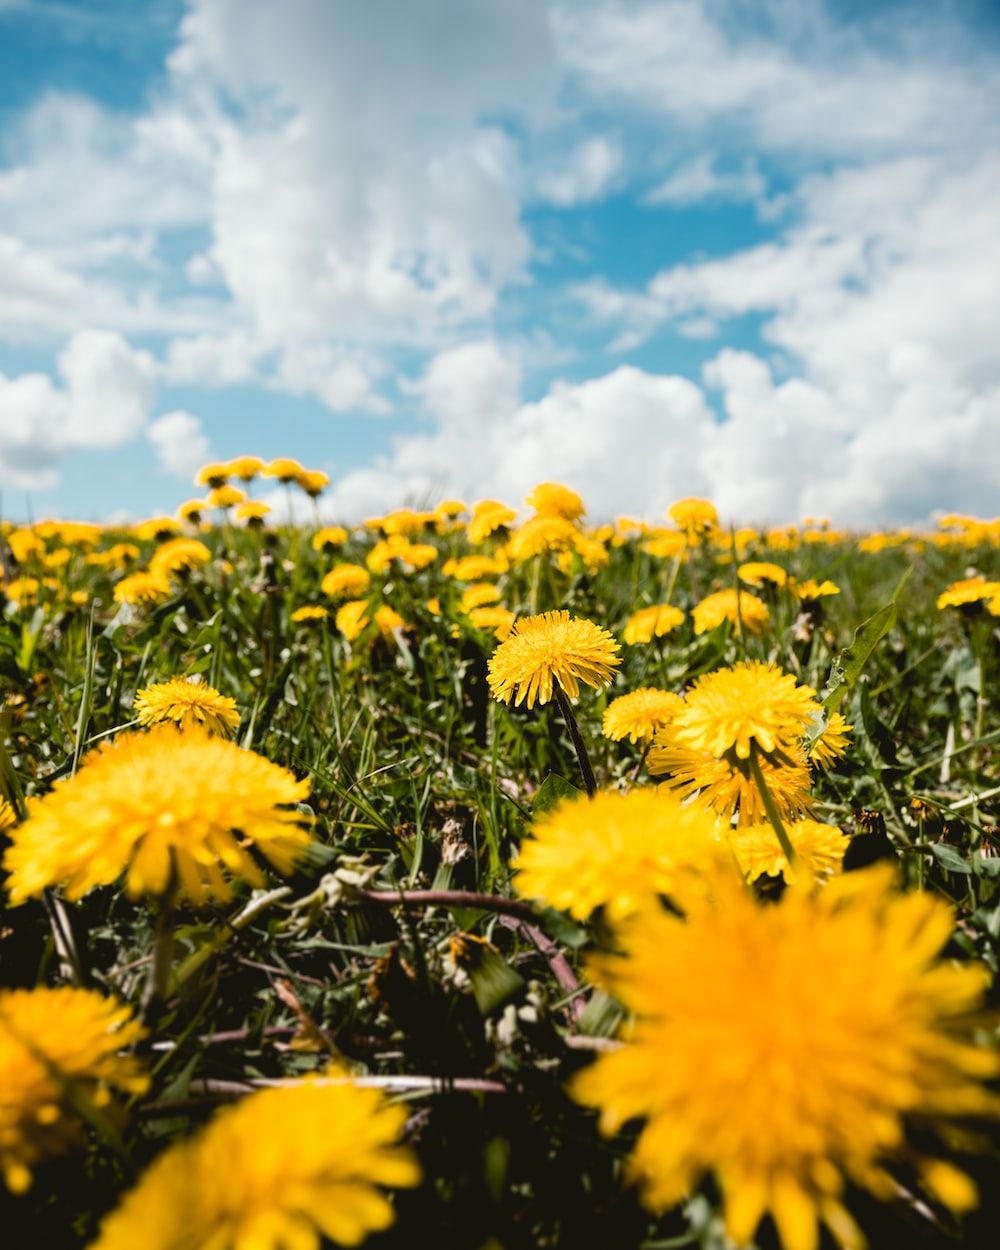 Yellow petaled flower lot during daytime photo